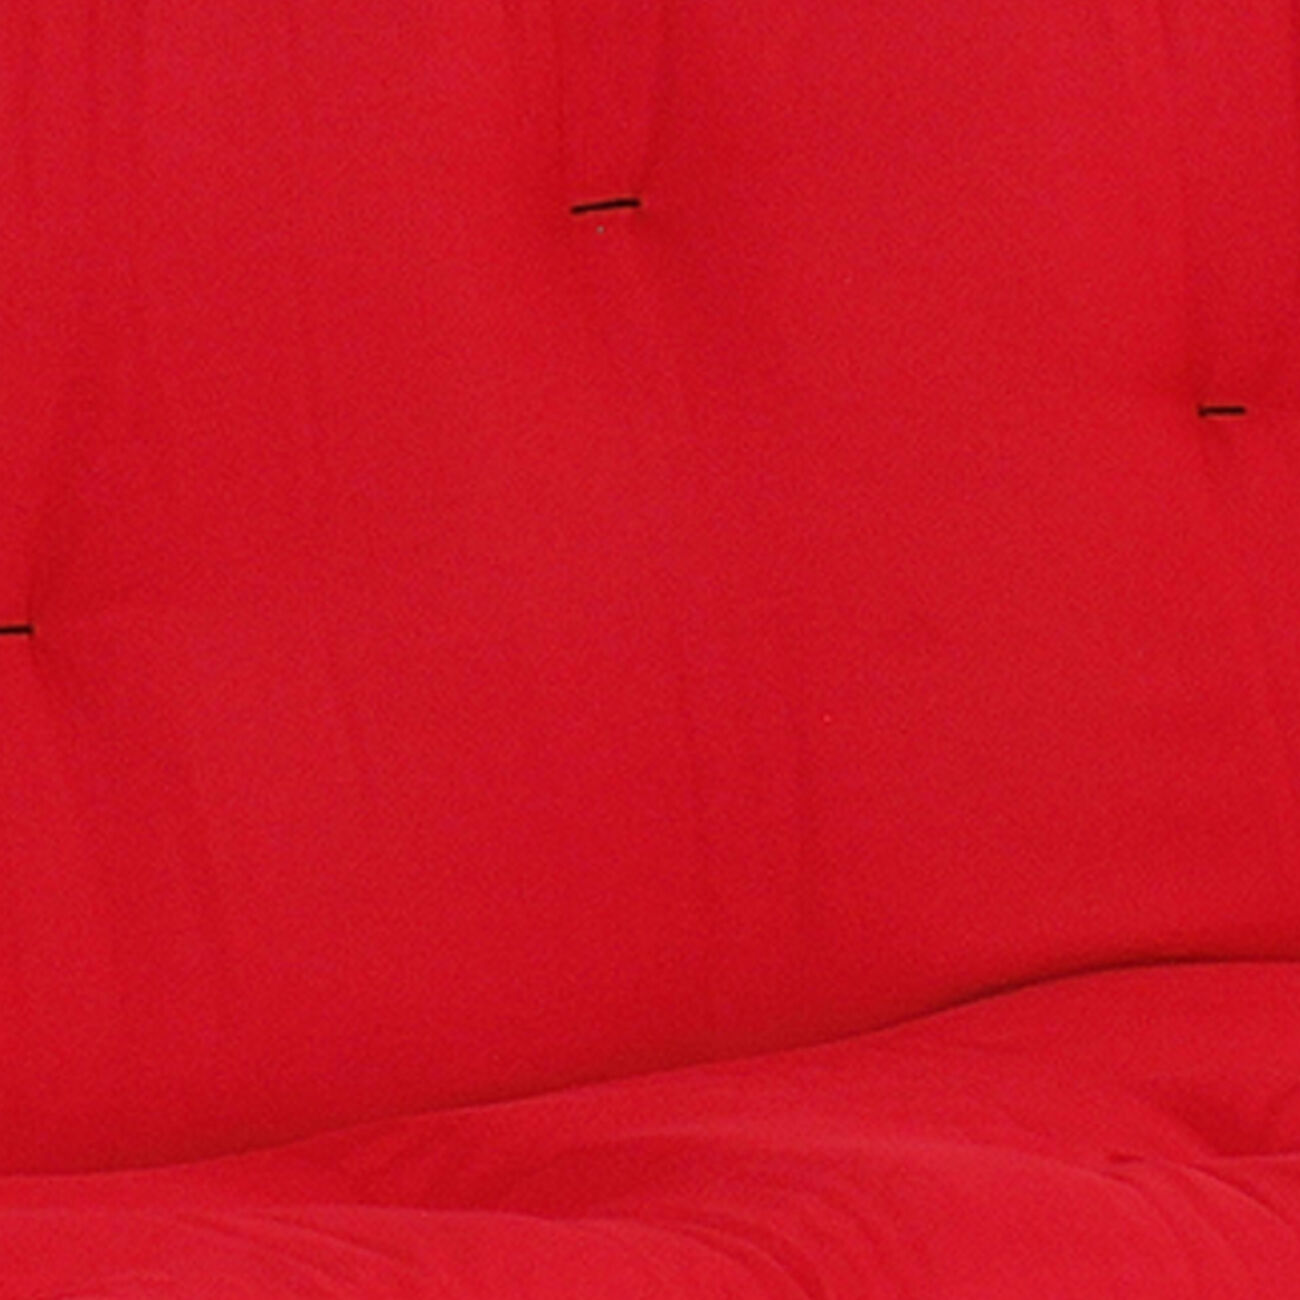 Full Size Reversible 6 inch Tufted Futon Mattress, Red and Black